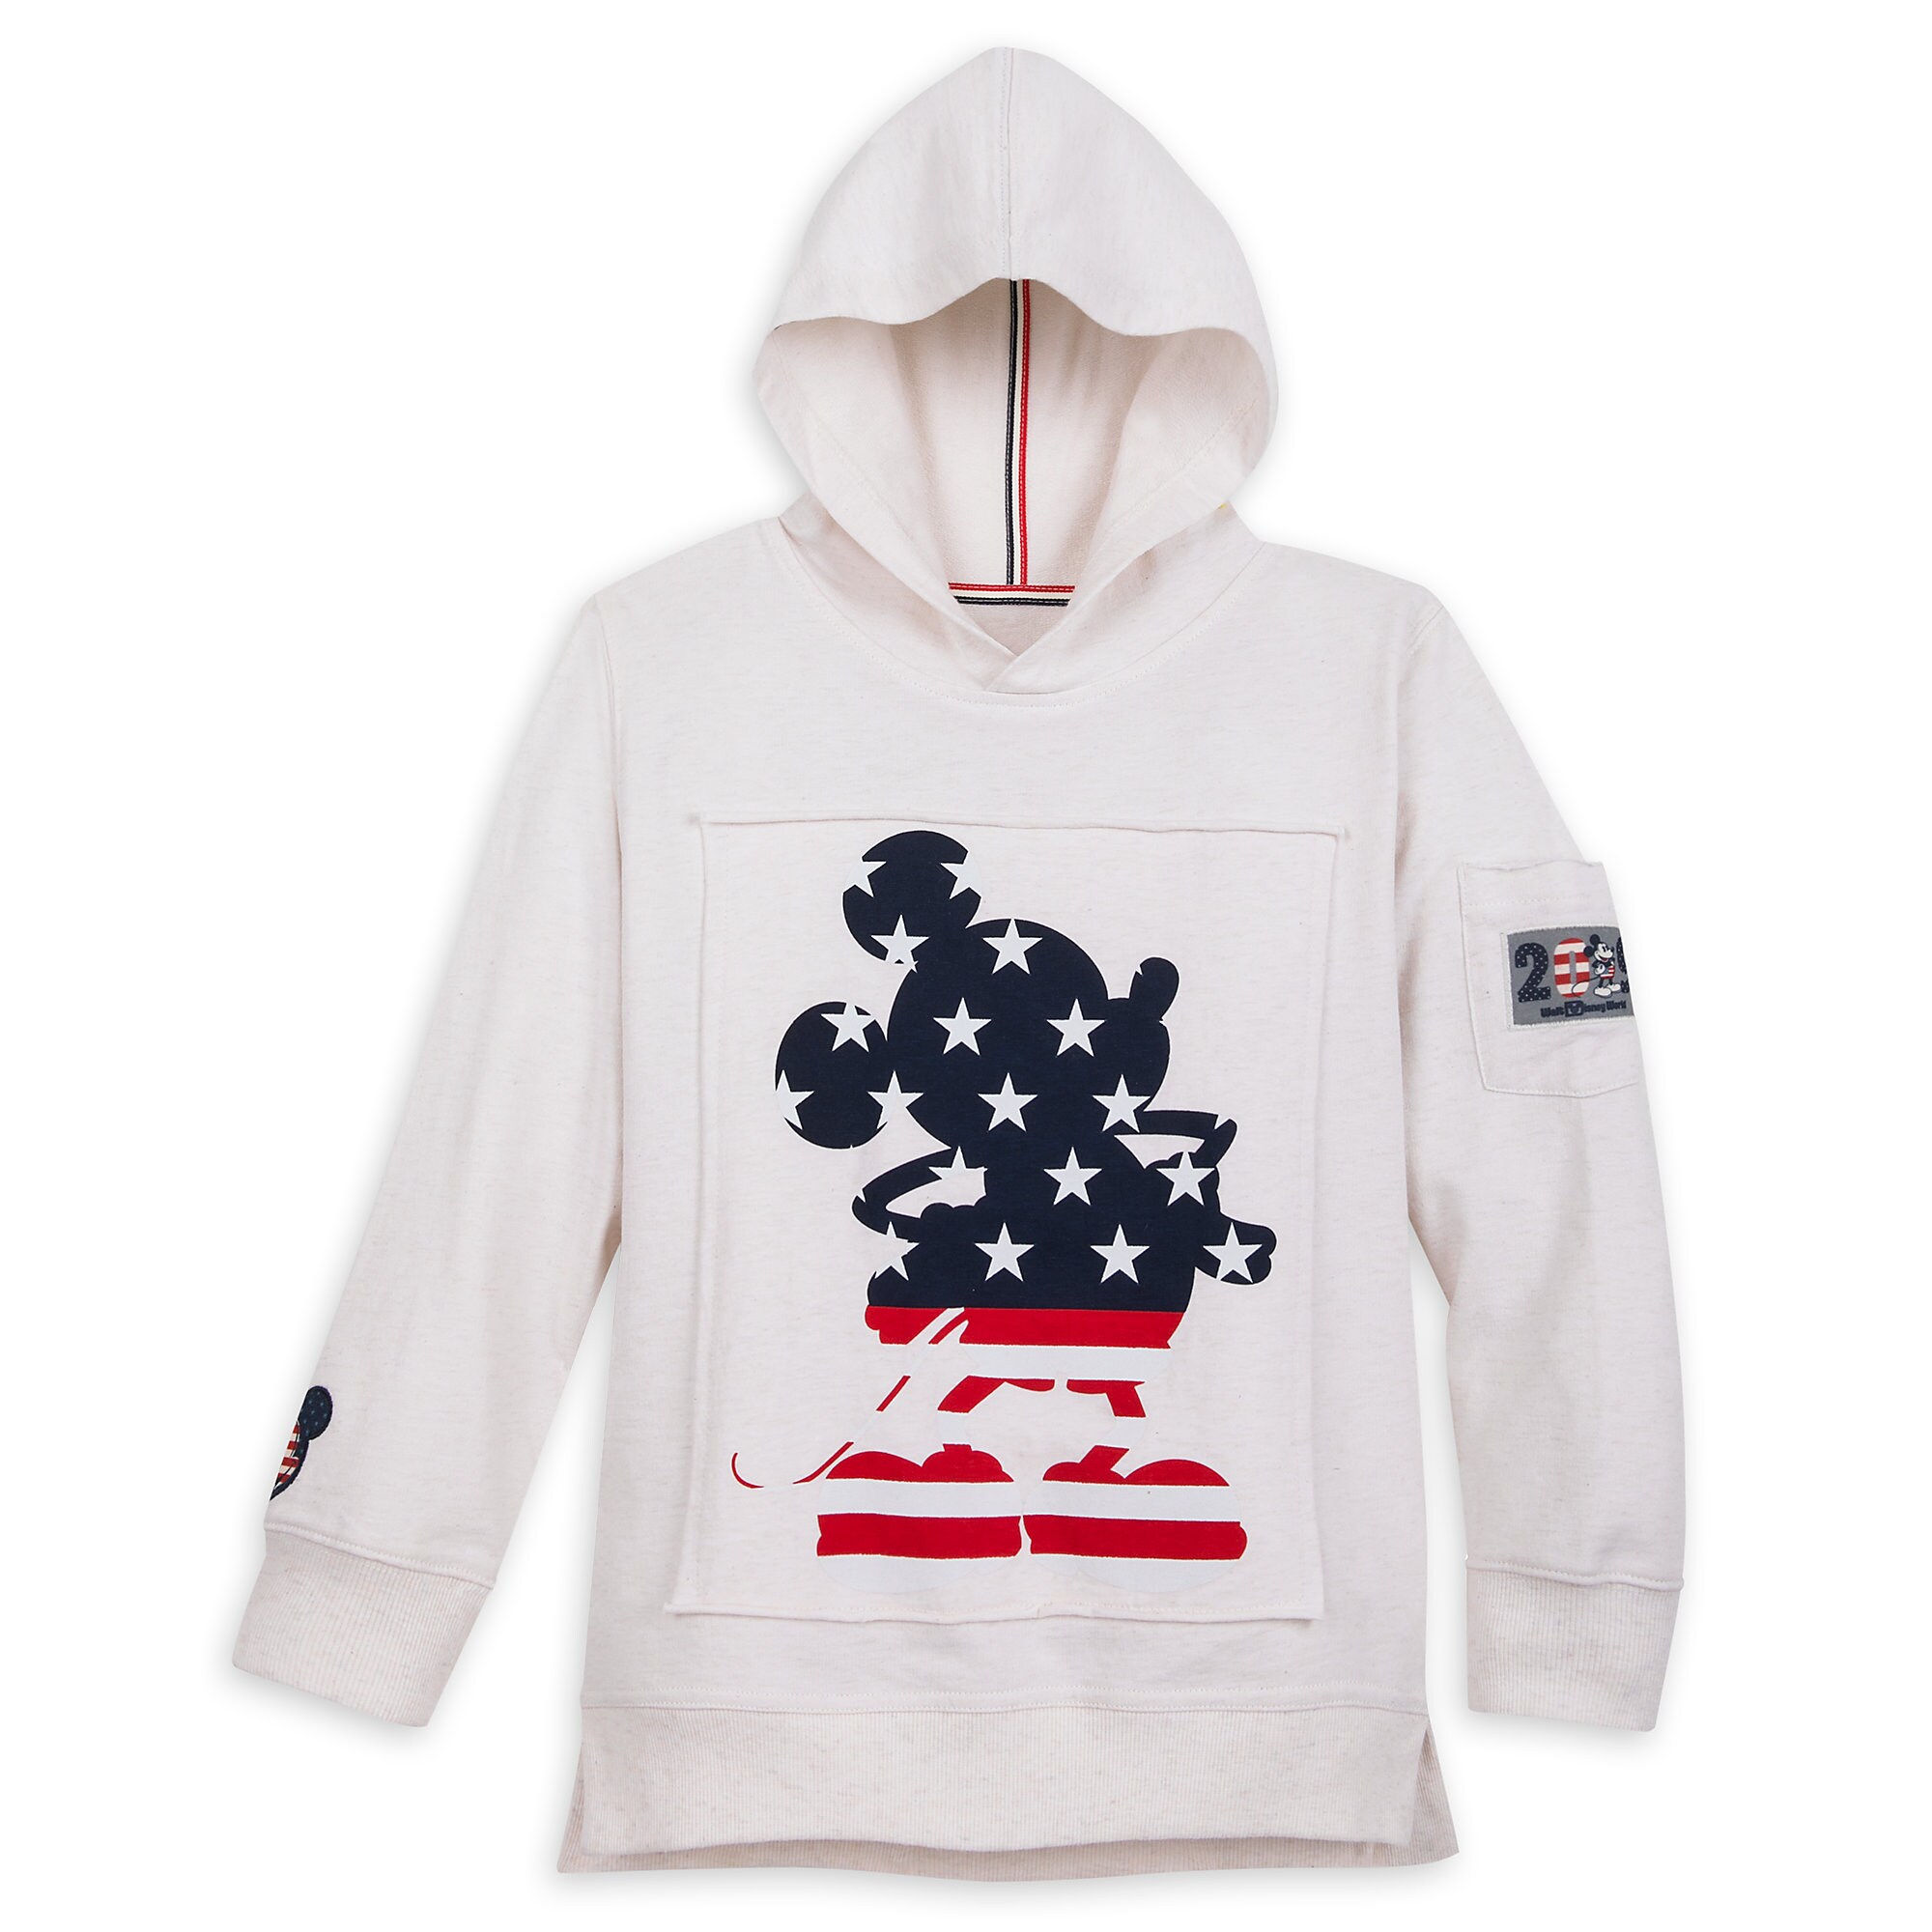 Mickey Mouse Americana Pullover Hoodie for Boys - Walt Disney World 2019